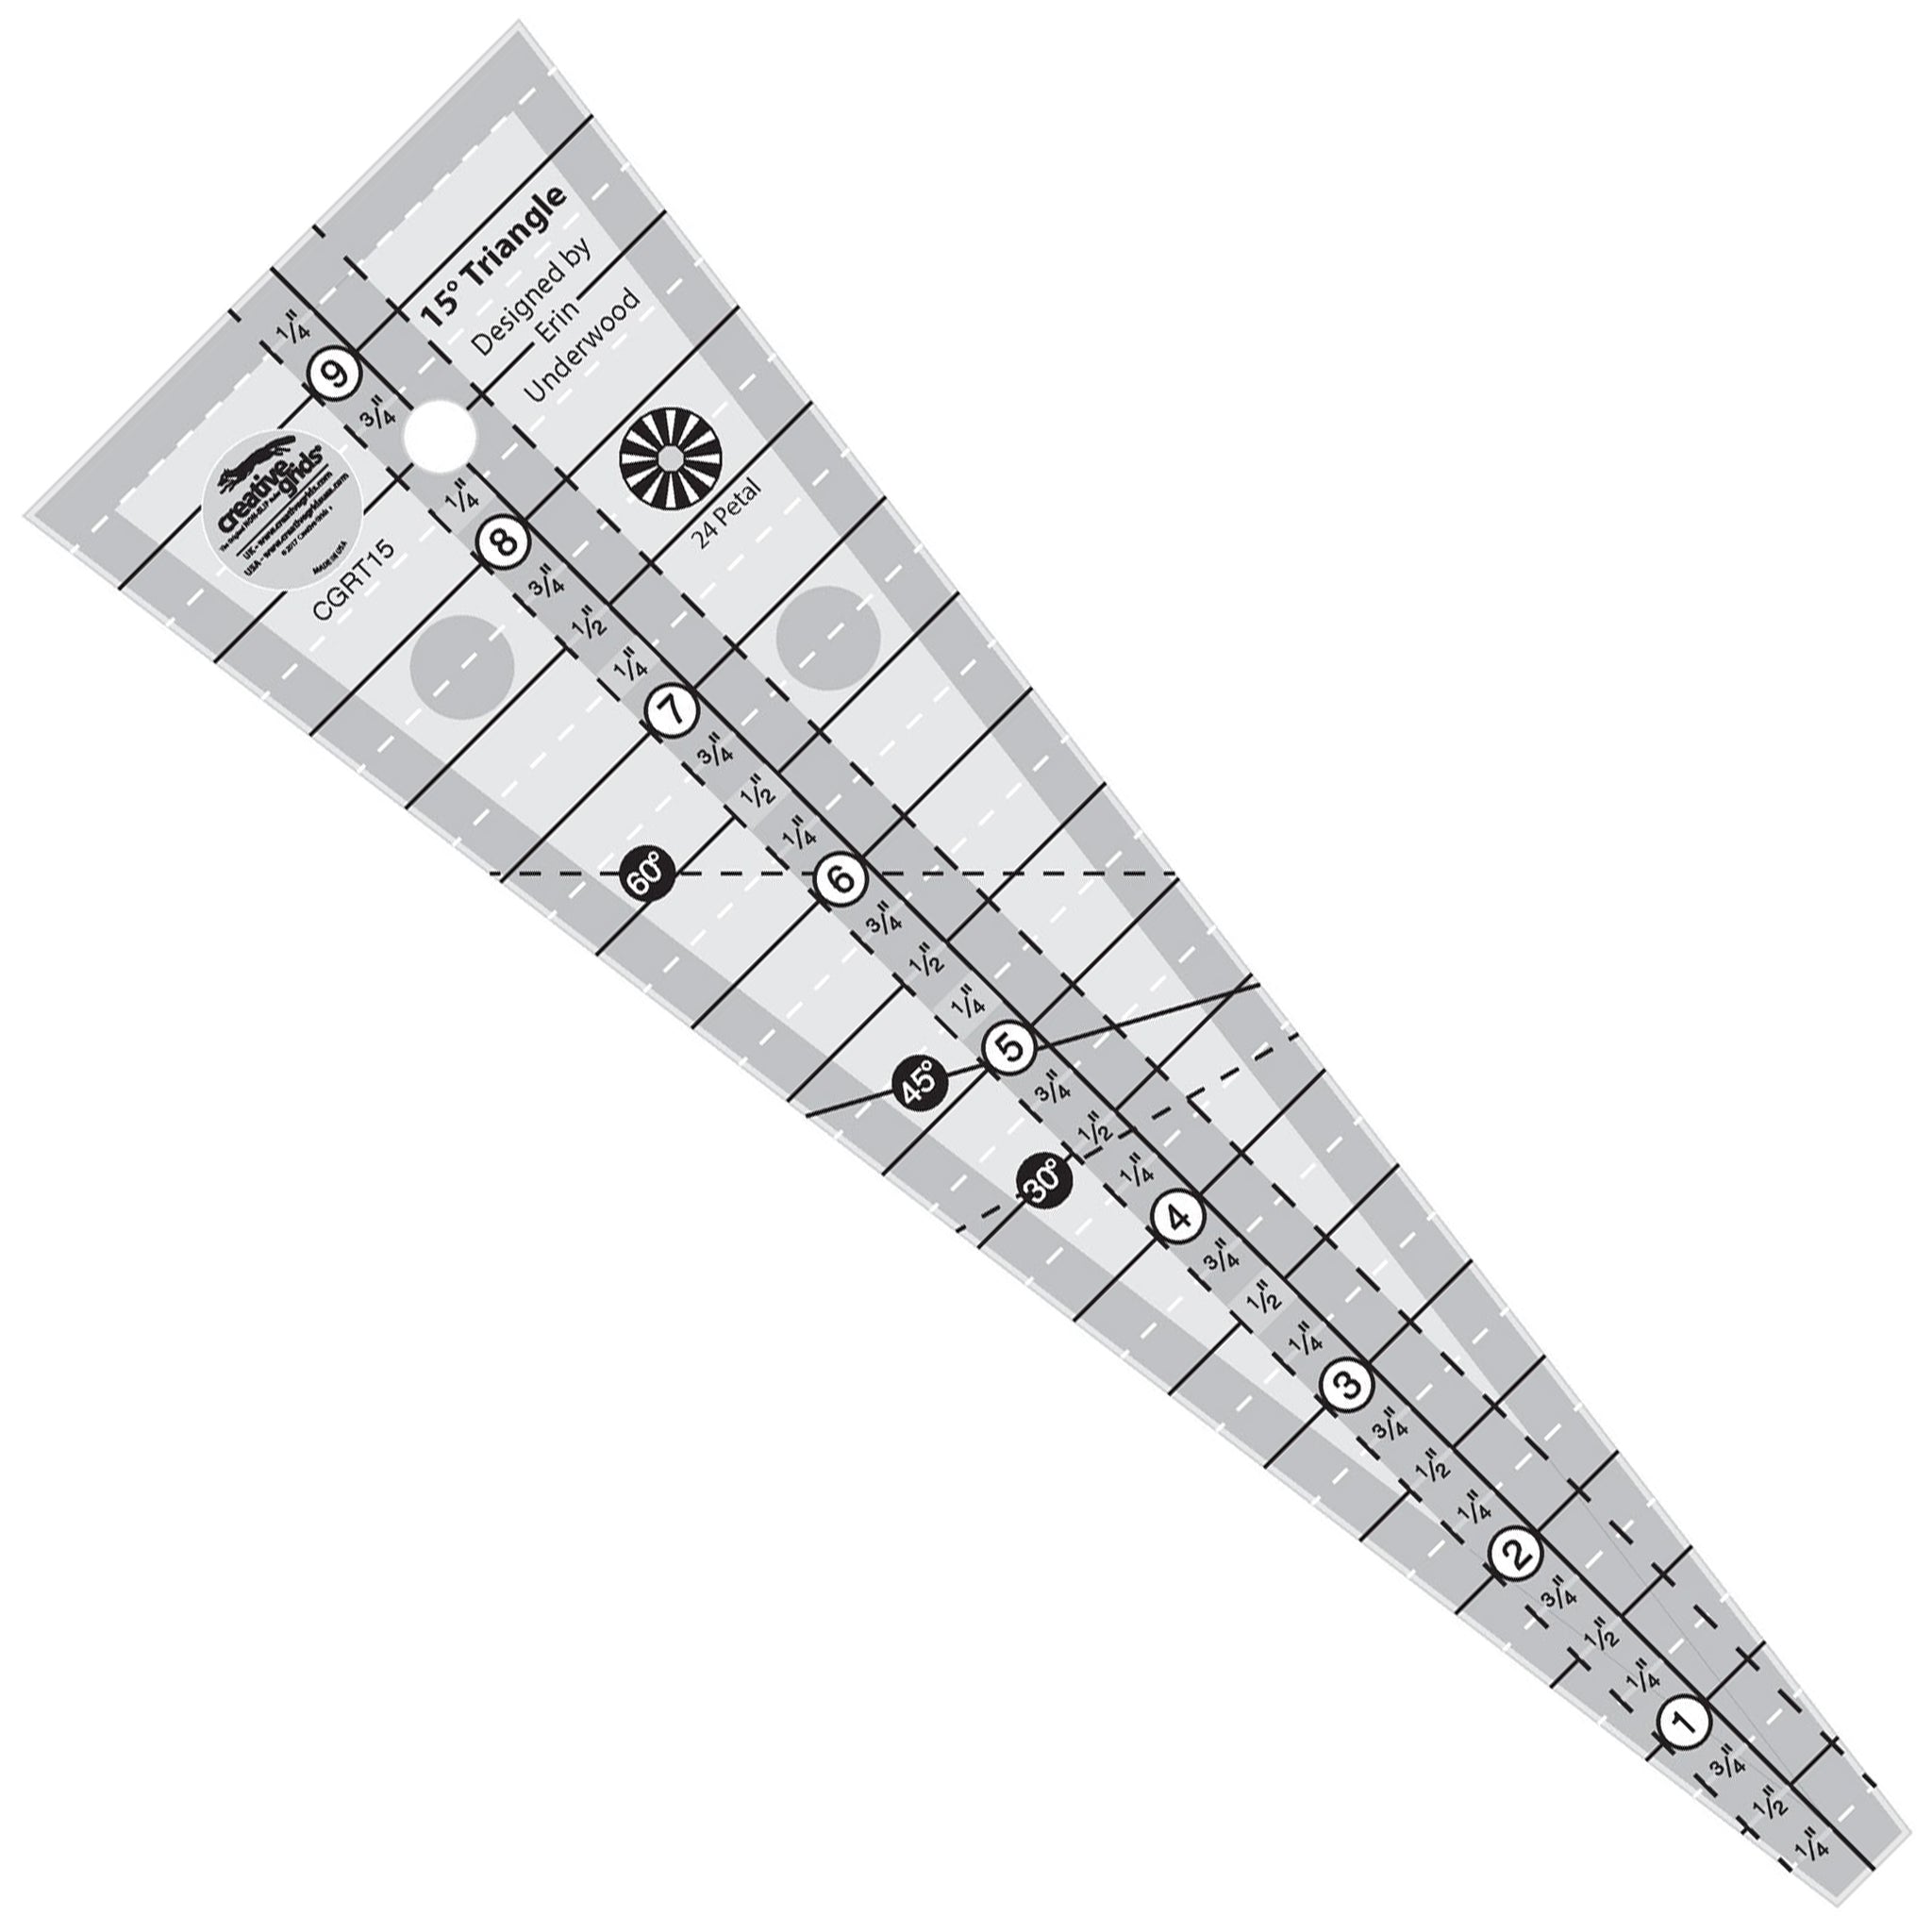 Creative Grids 15 Degree Triangle Quilt Ruler (CGRT15)